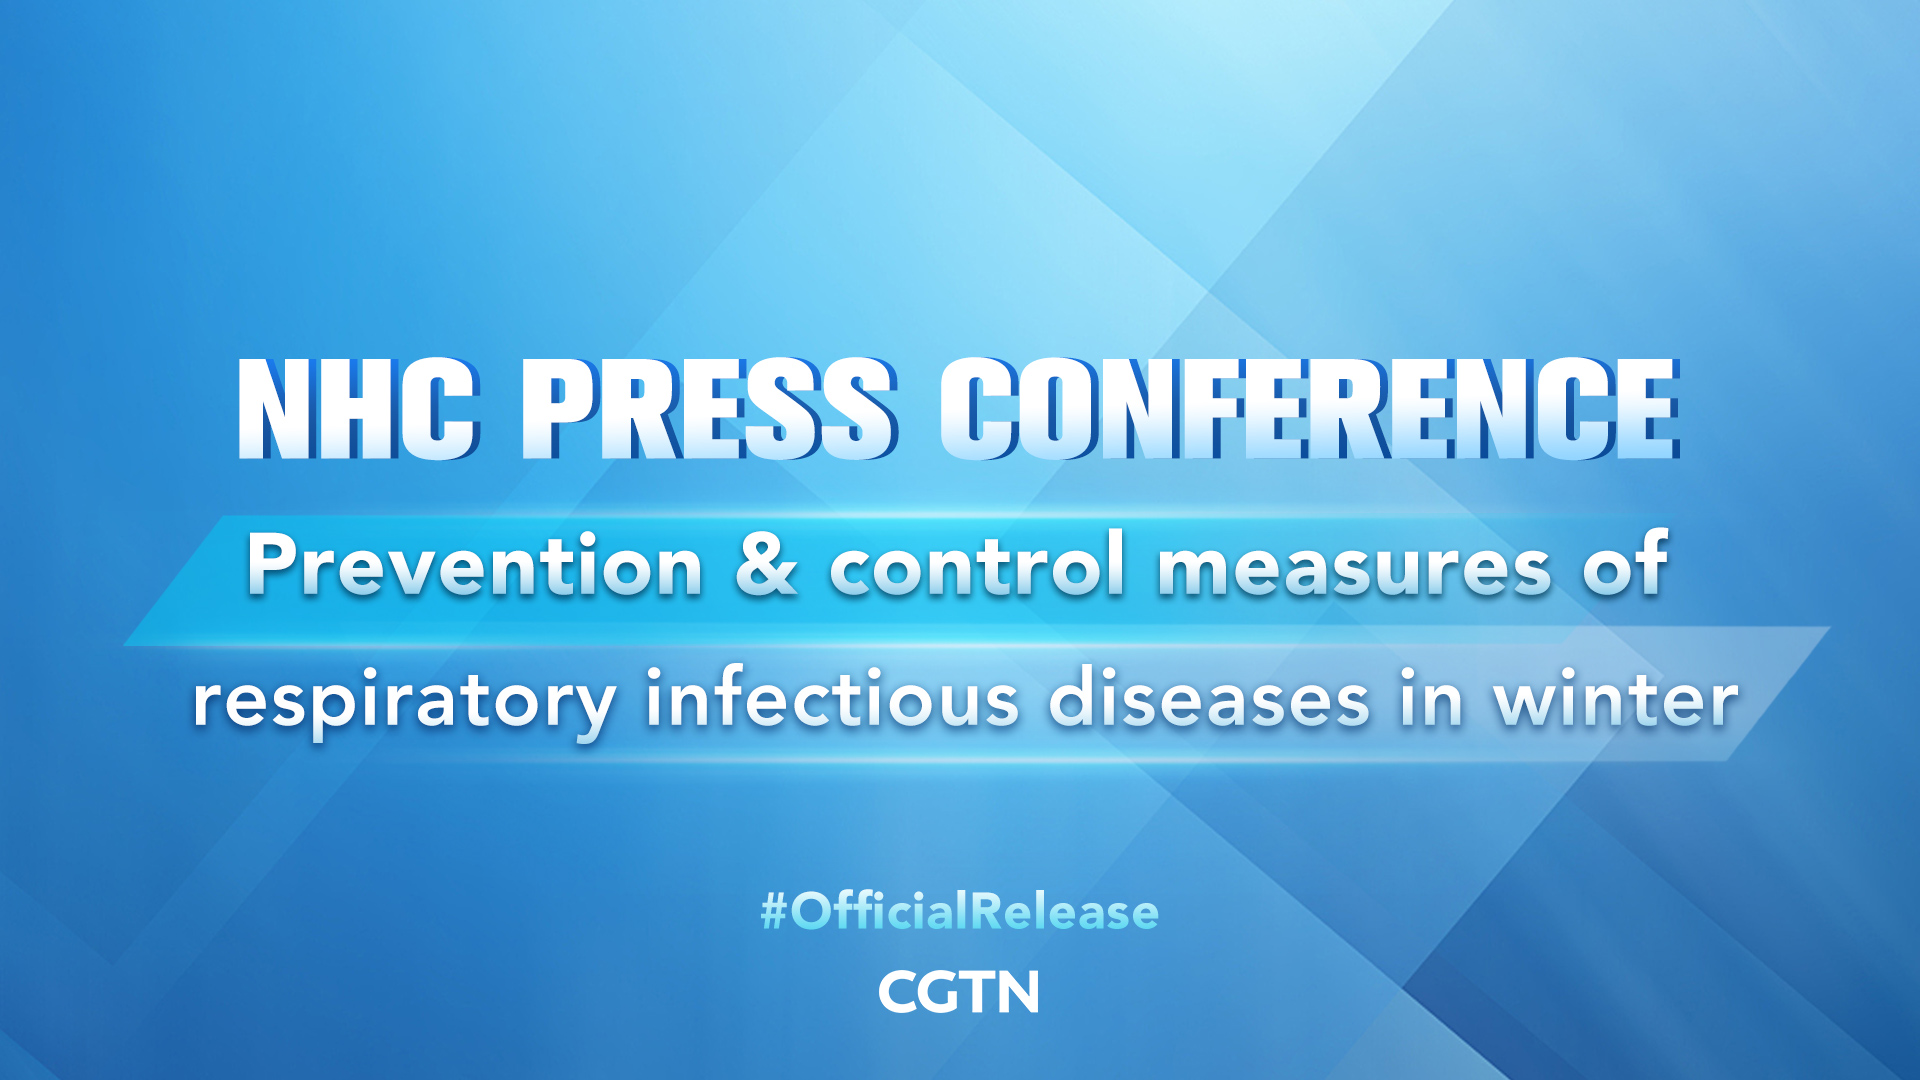 Live: Briefing on measures against respiratory infectious diseases in winter